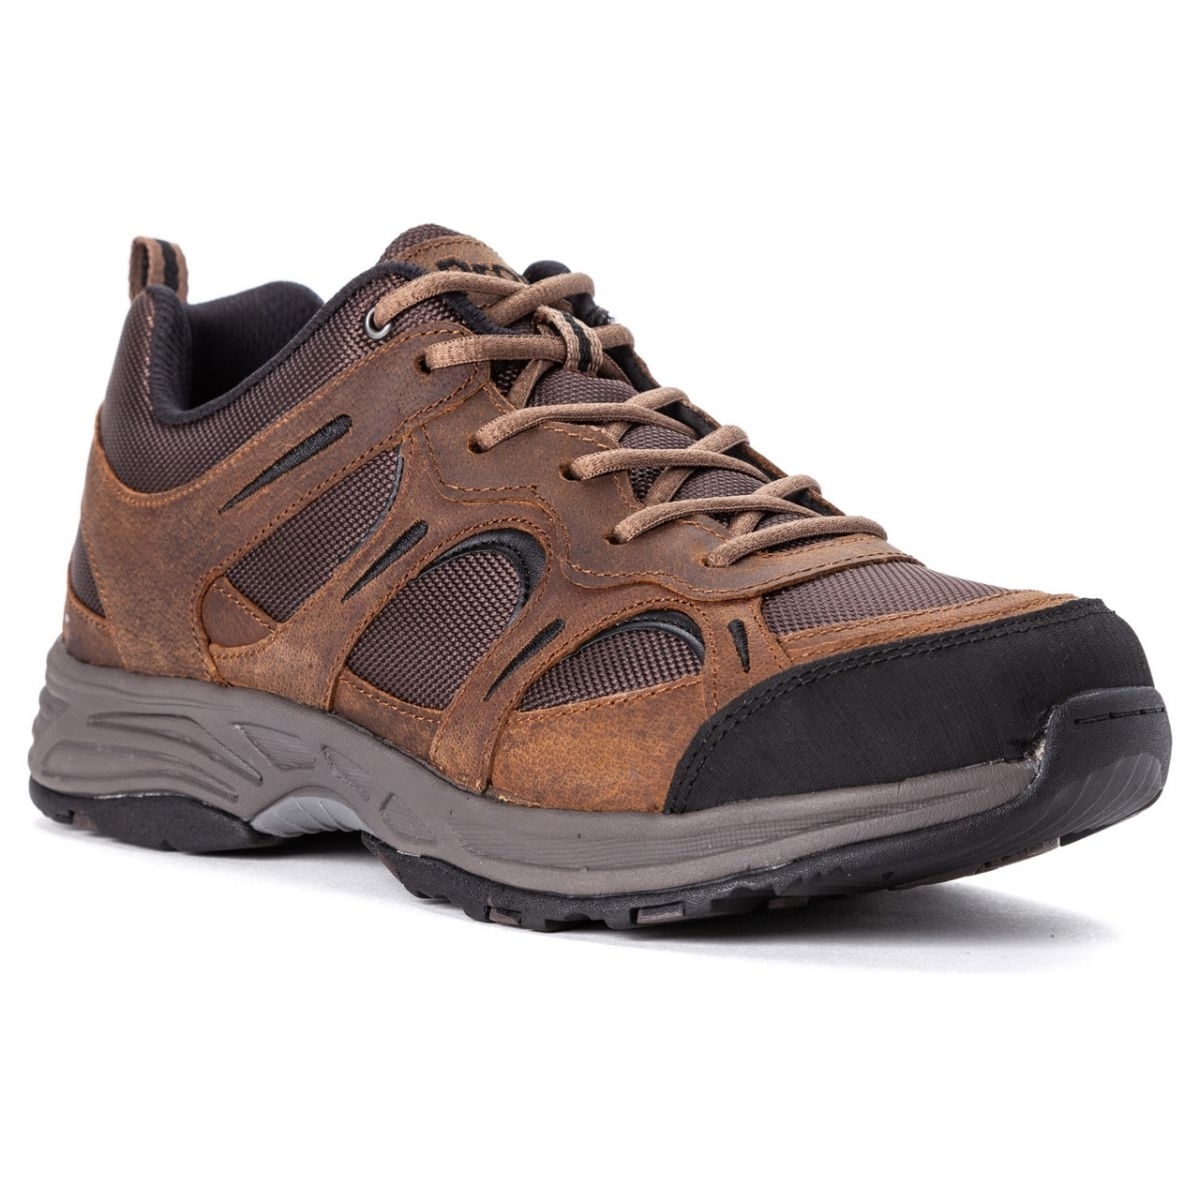 Propet Men's Connelly Hiking Shoe Brown - M5503BR BROWN - BROWN, 8-3E